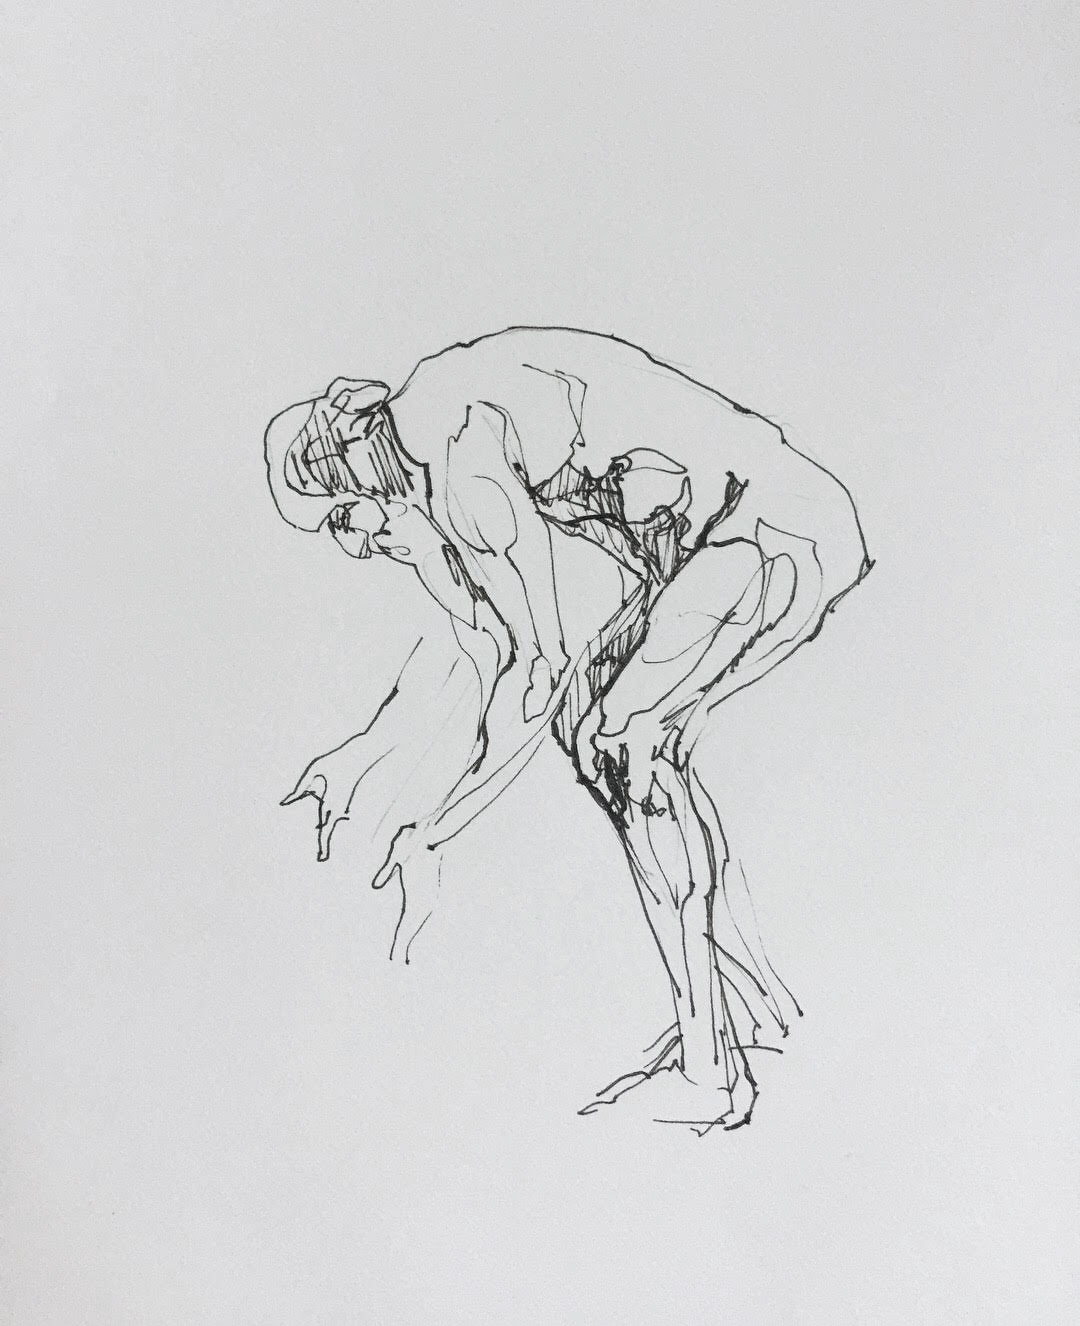 Sketching the figure